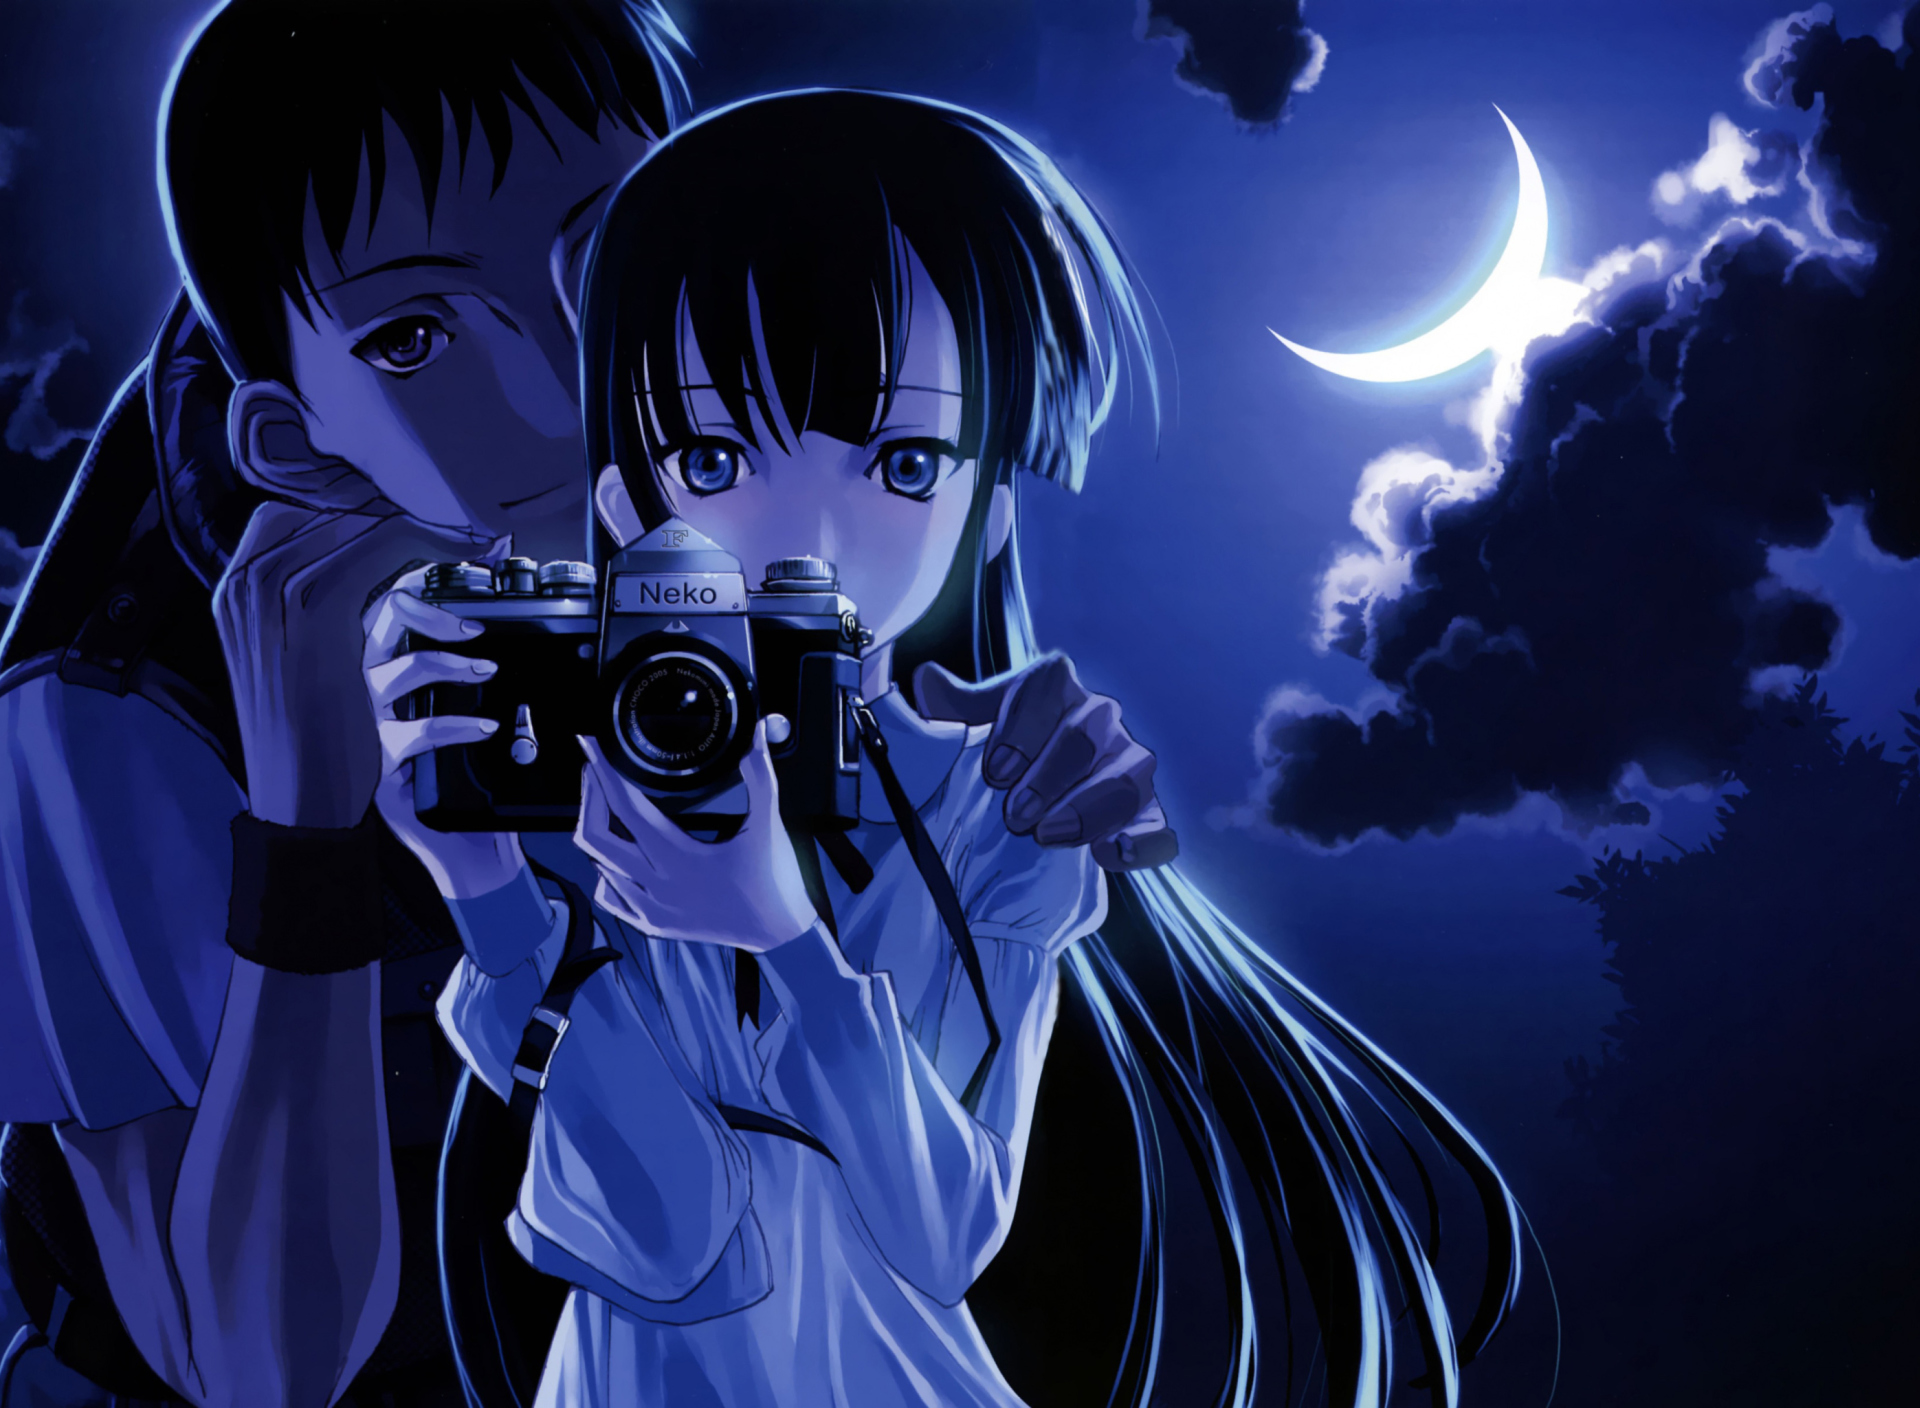 Anime Girl With Vintage Photo Camera wallpaper 1920x1408